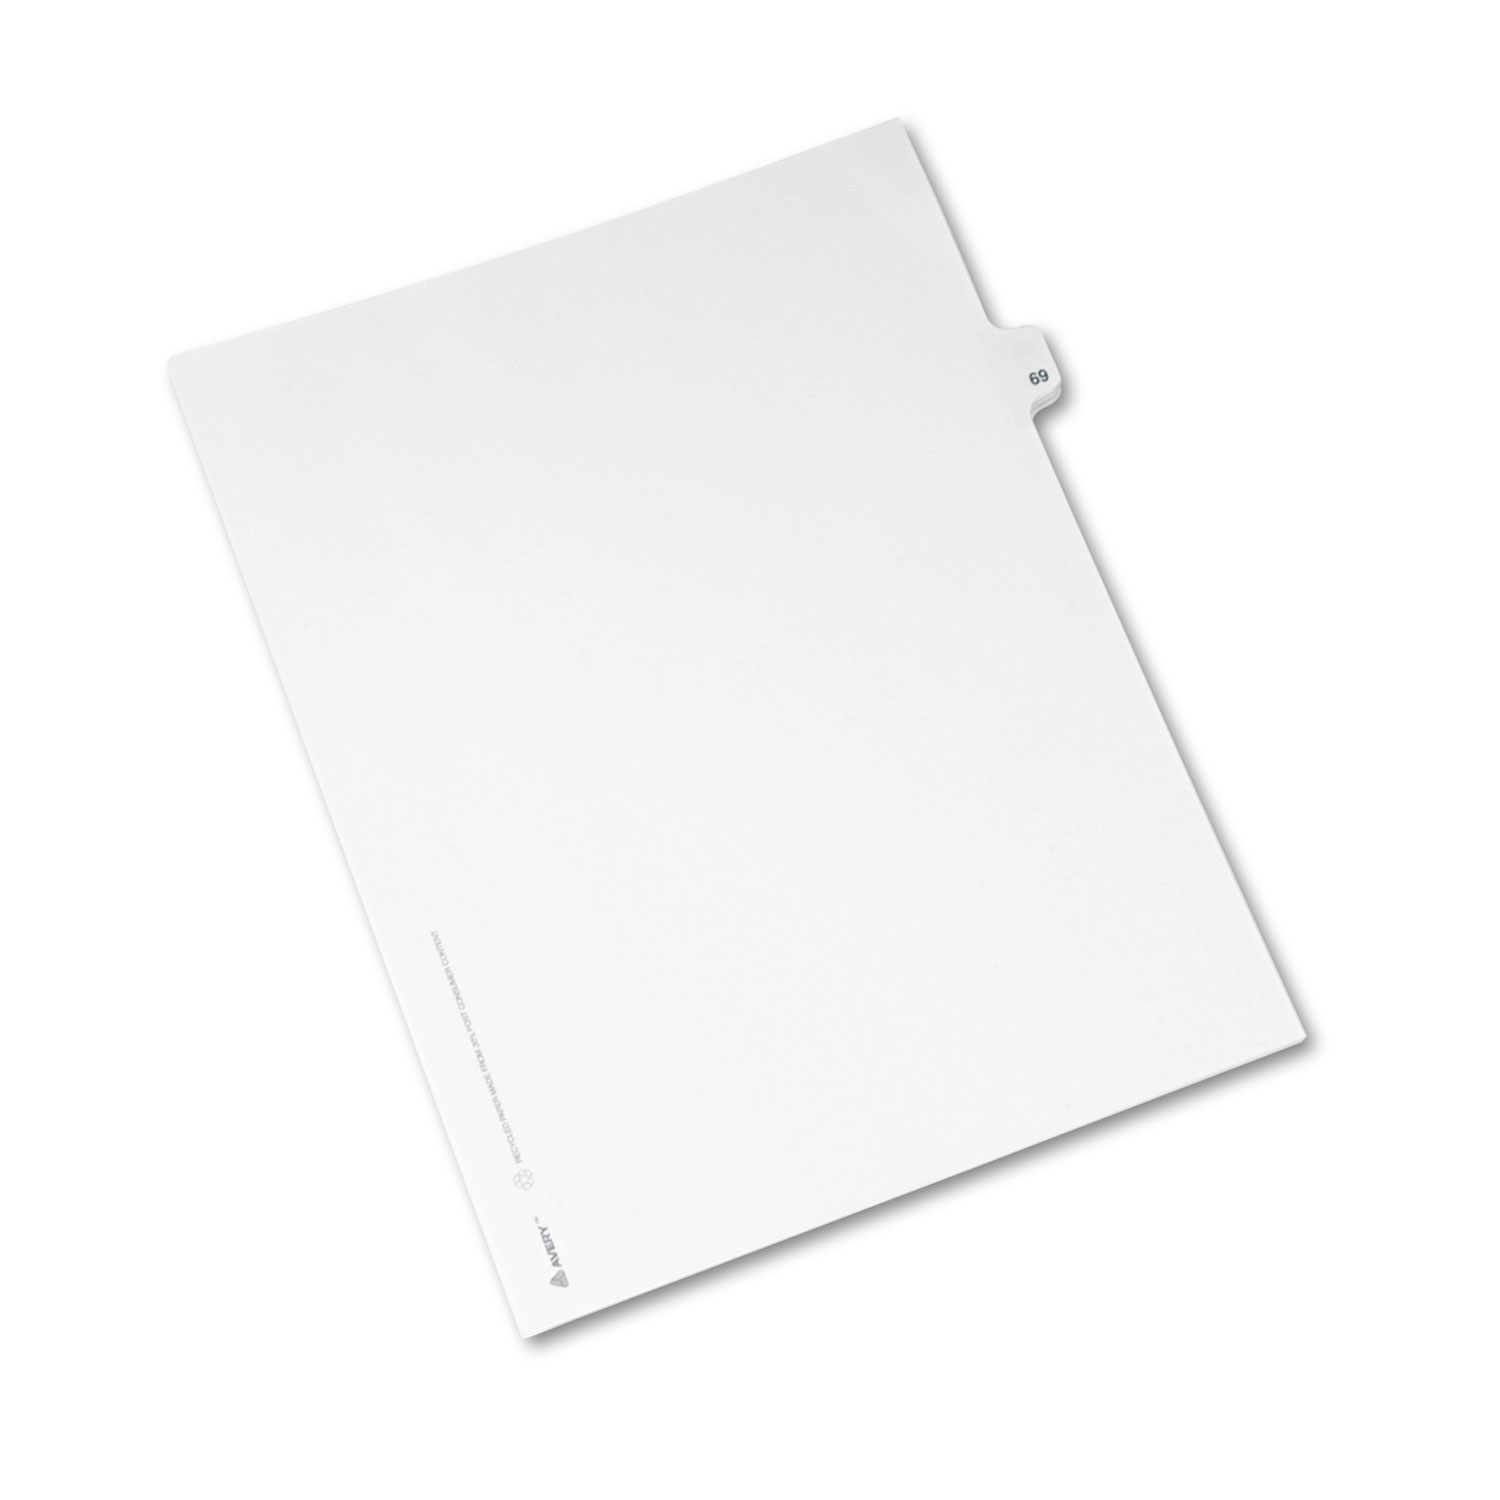 Avery-Style Legal Exhibit Side Tab Divider, Title: 69, Letter, White, 25/Pack